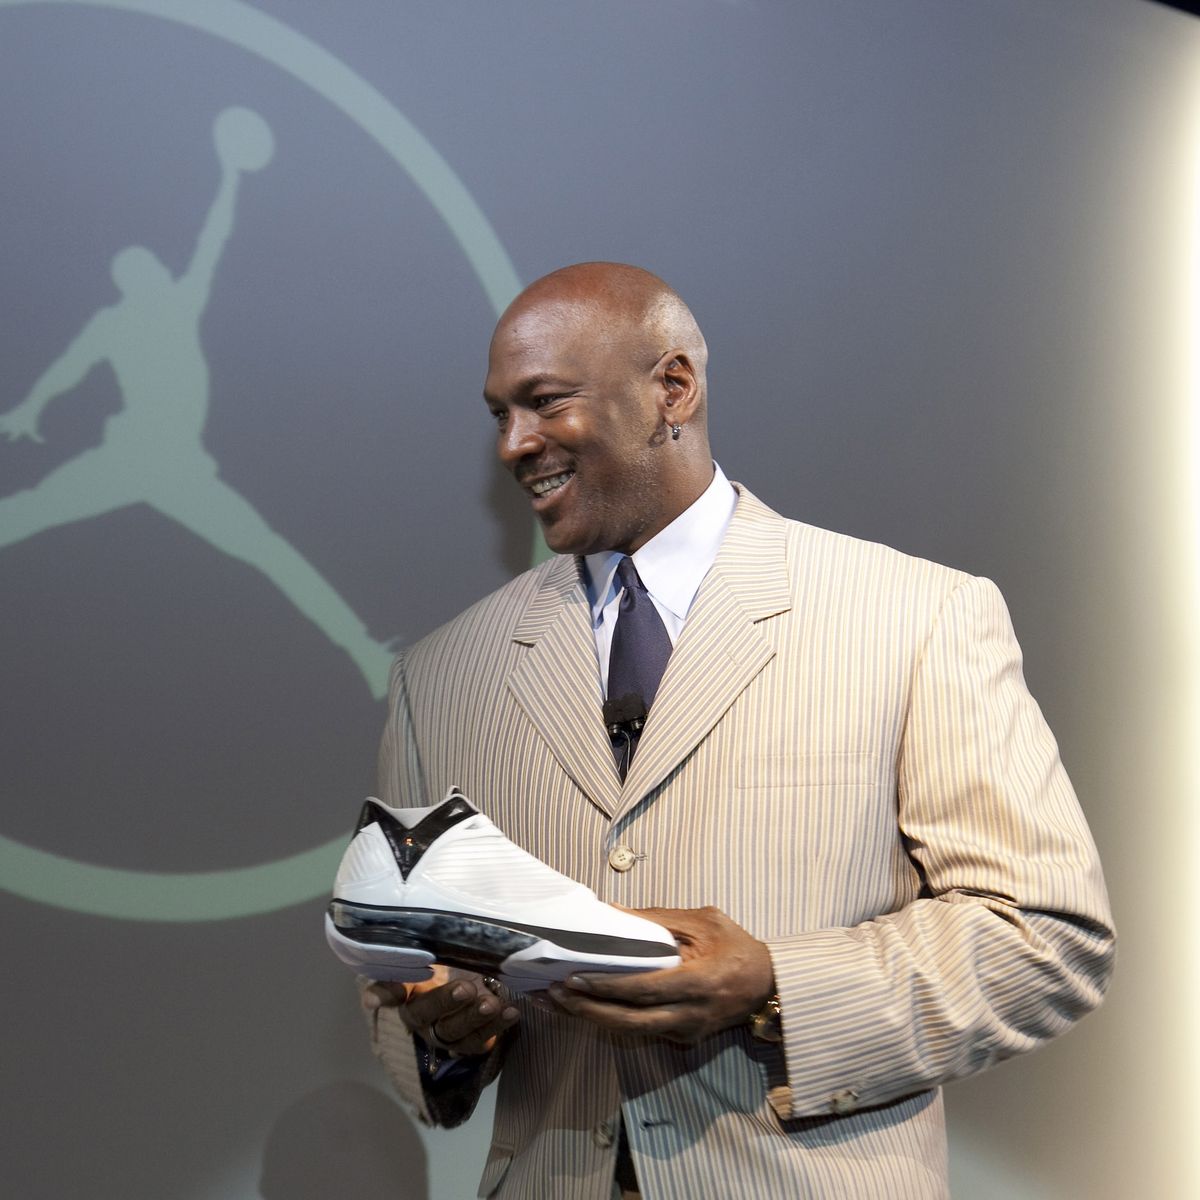 Air' takes leaps but stays true to Nike's actual chase of Michael Jordan